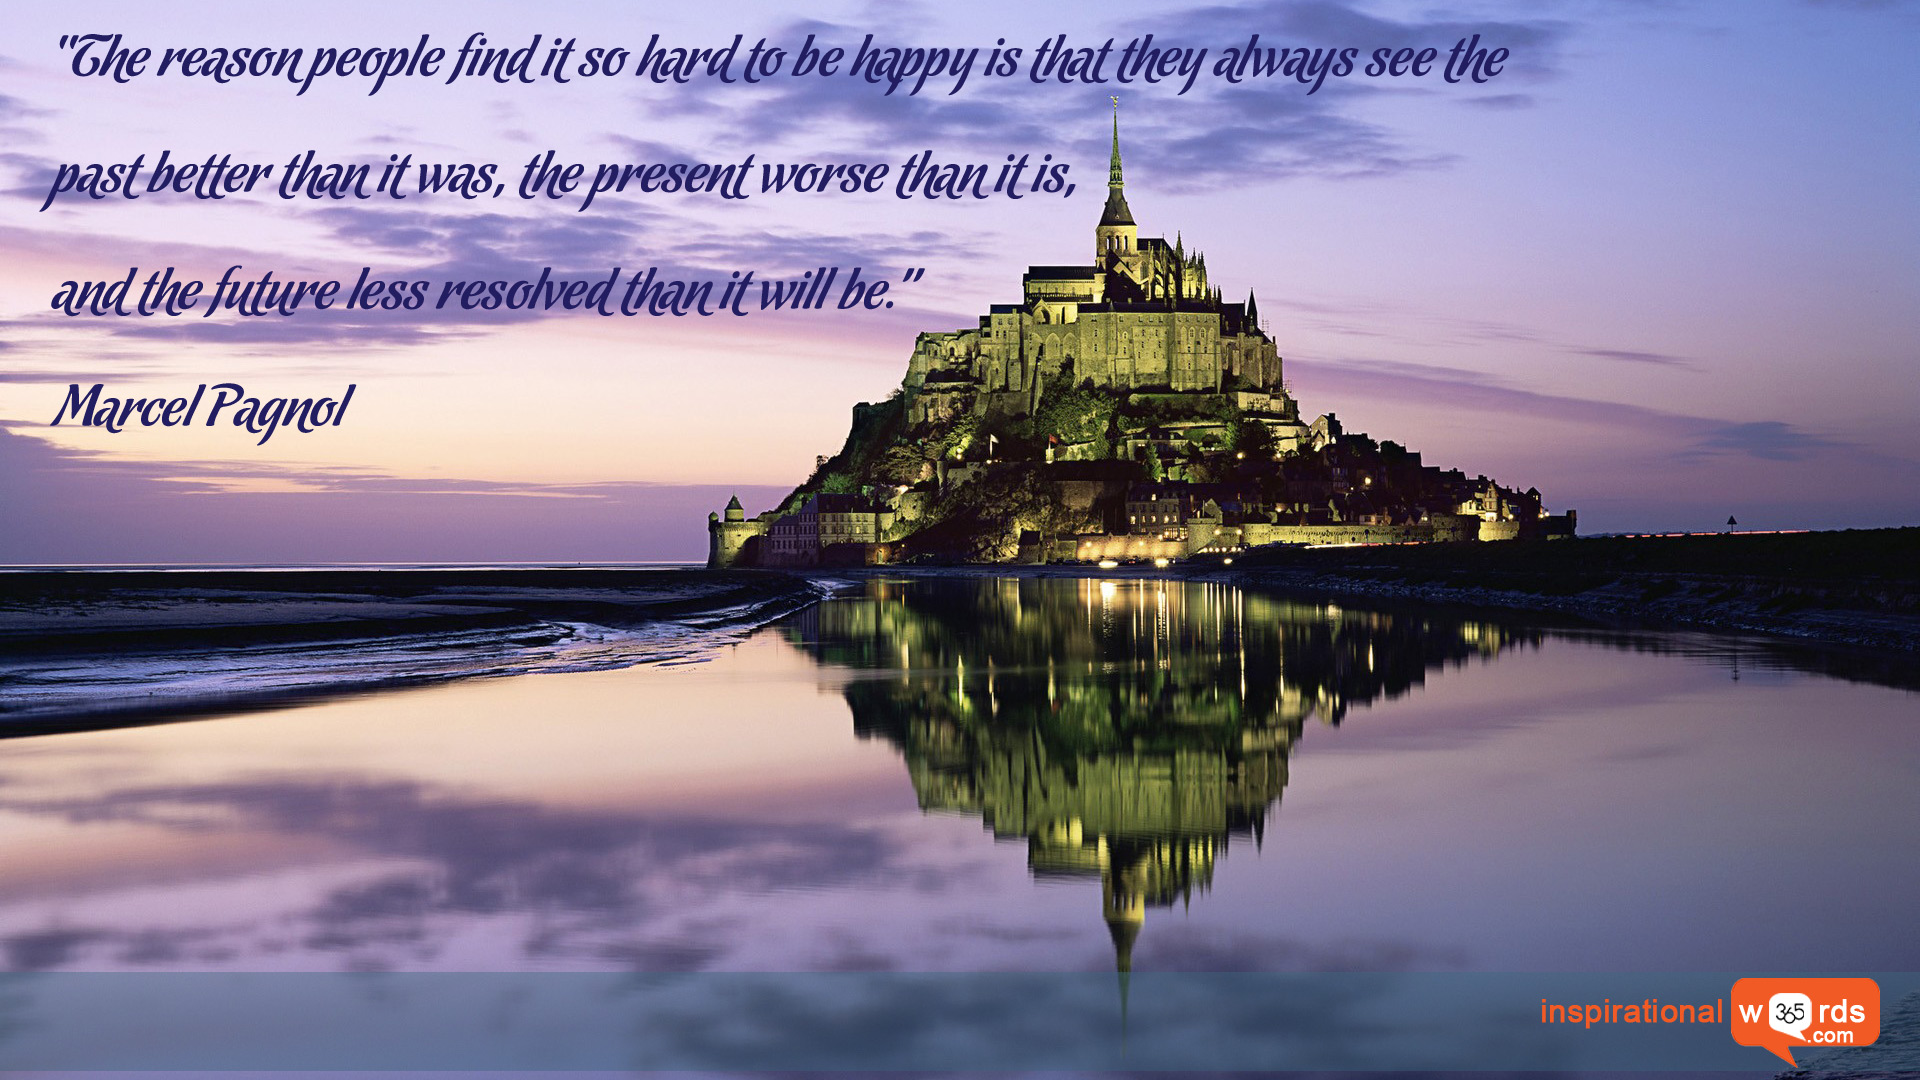 Inspirational Wallpaper Quote by Marcel Pagnol